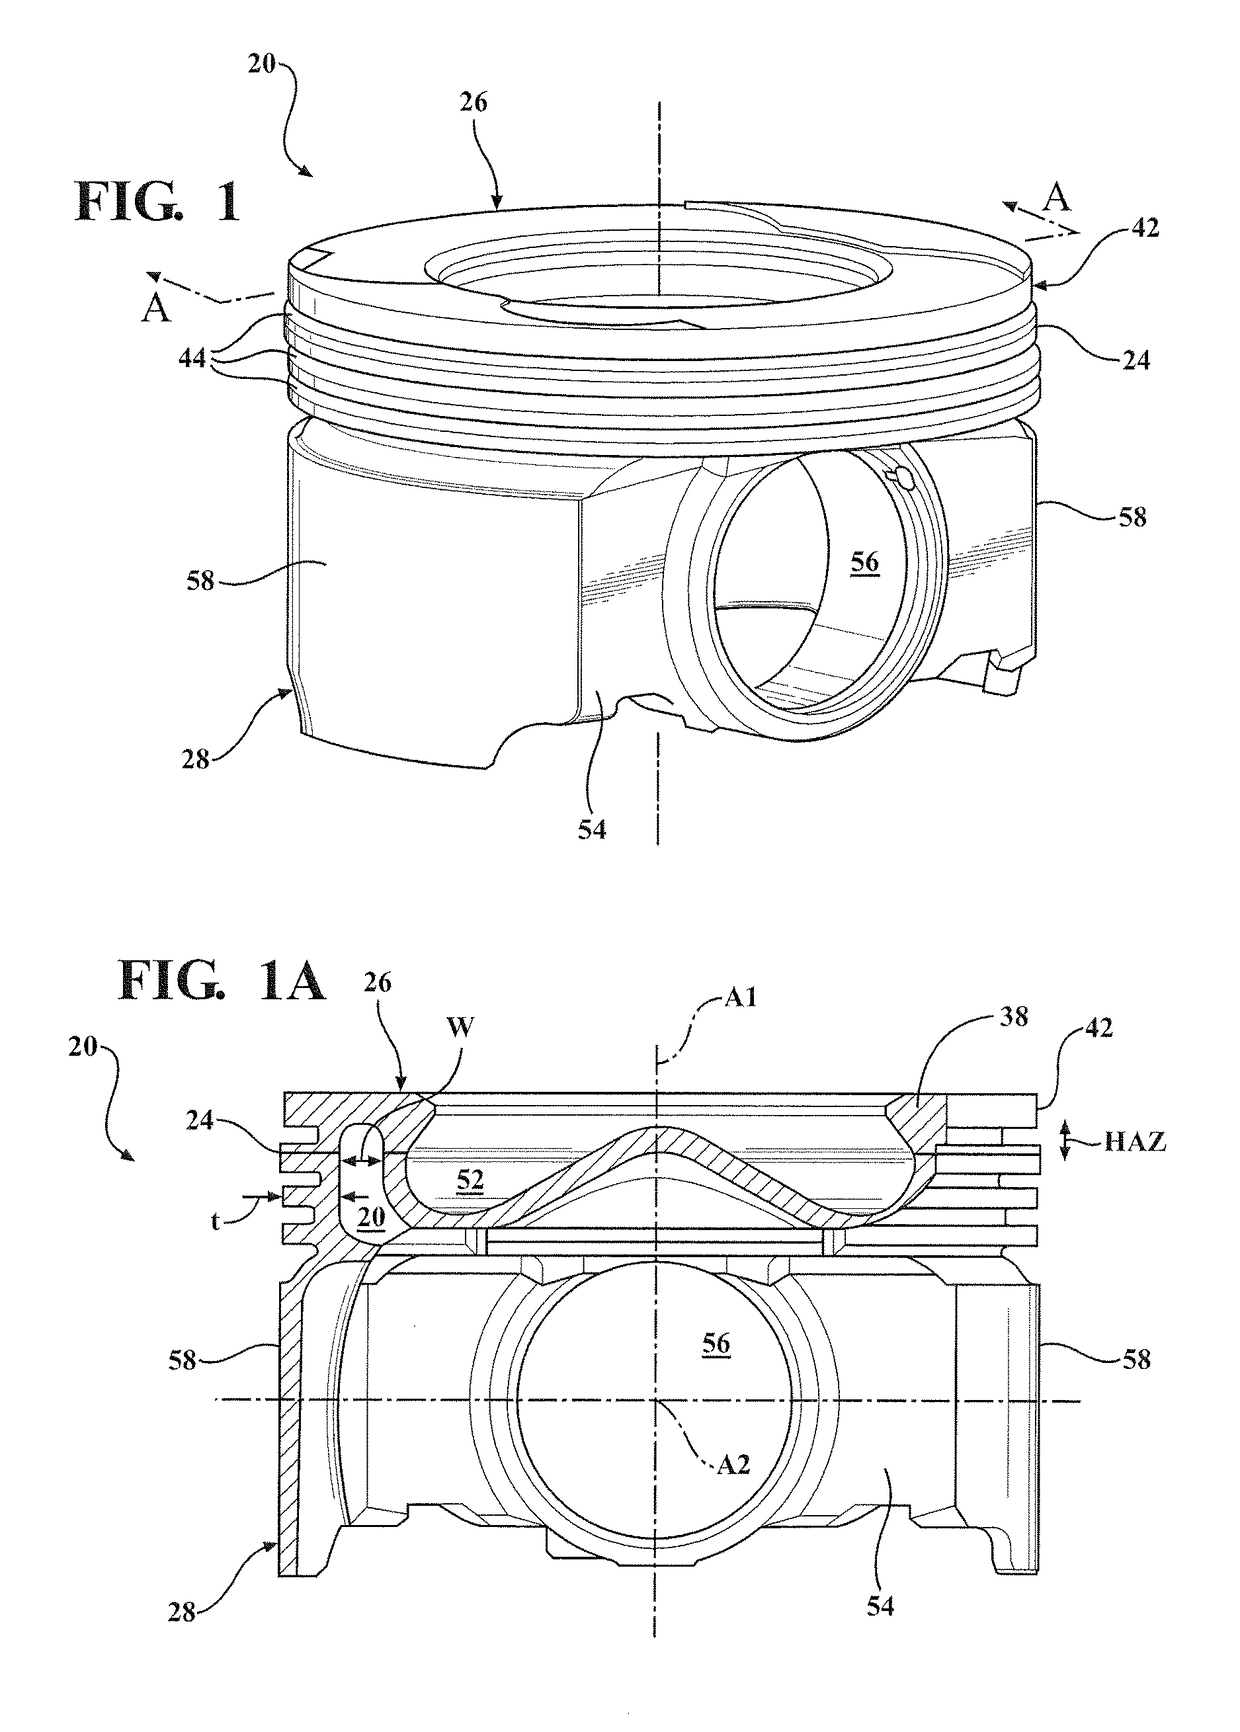 Hybrid induction welding process applied to piston manufacturing